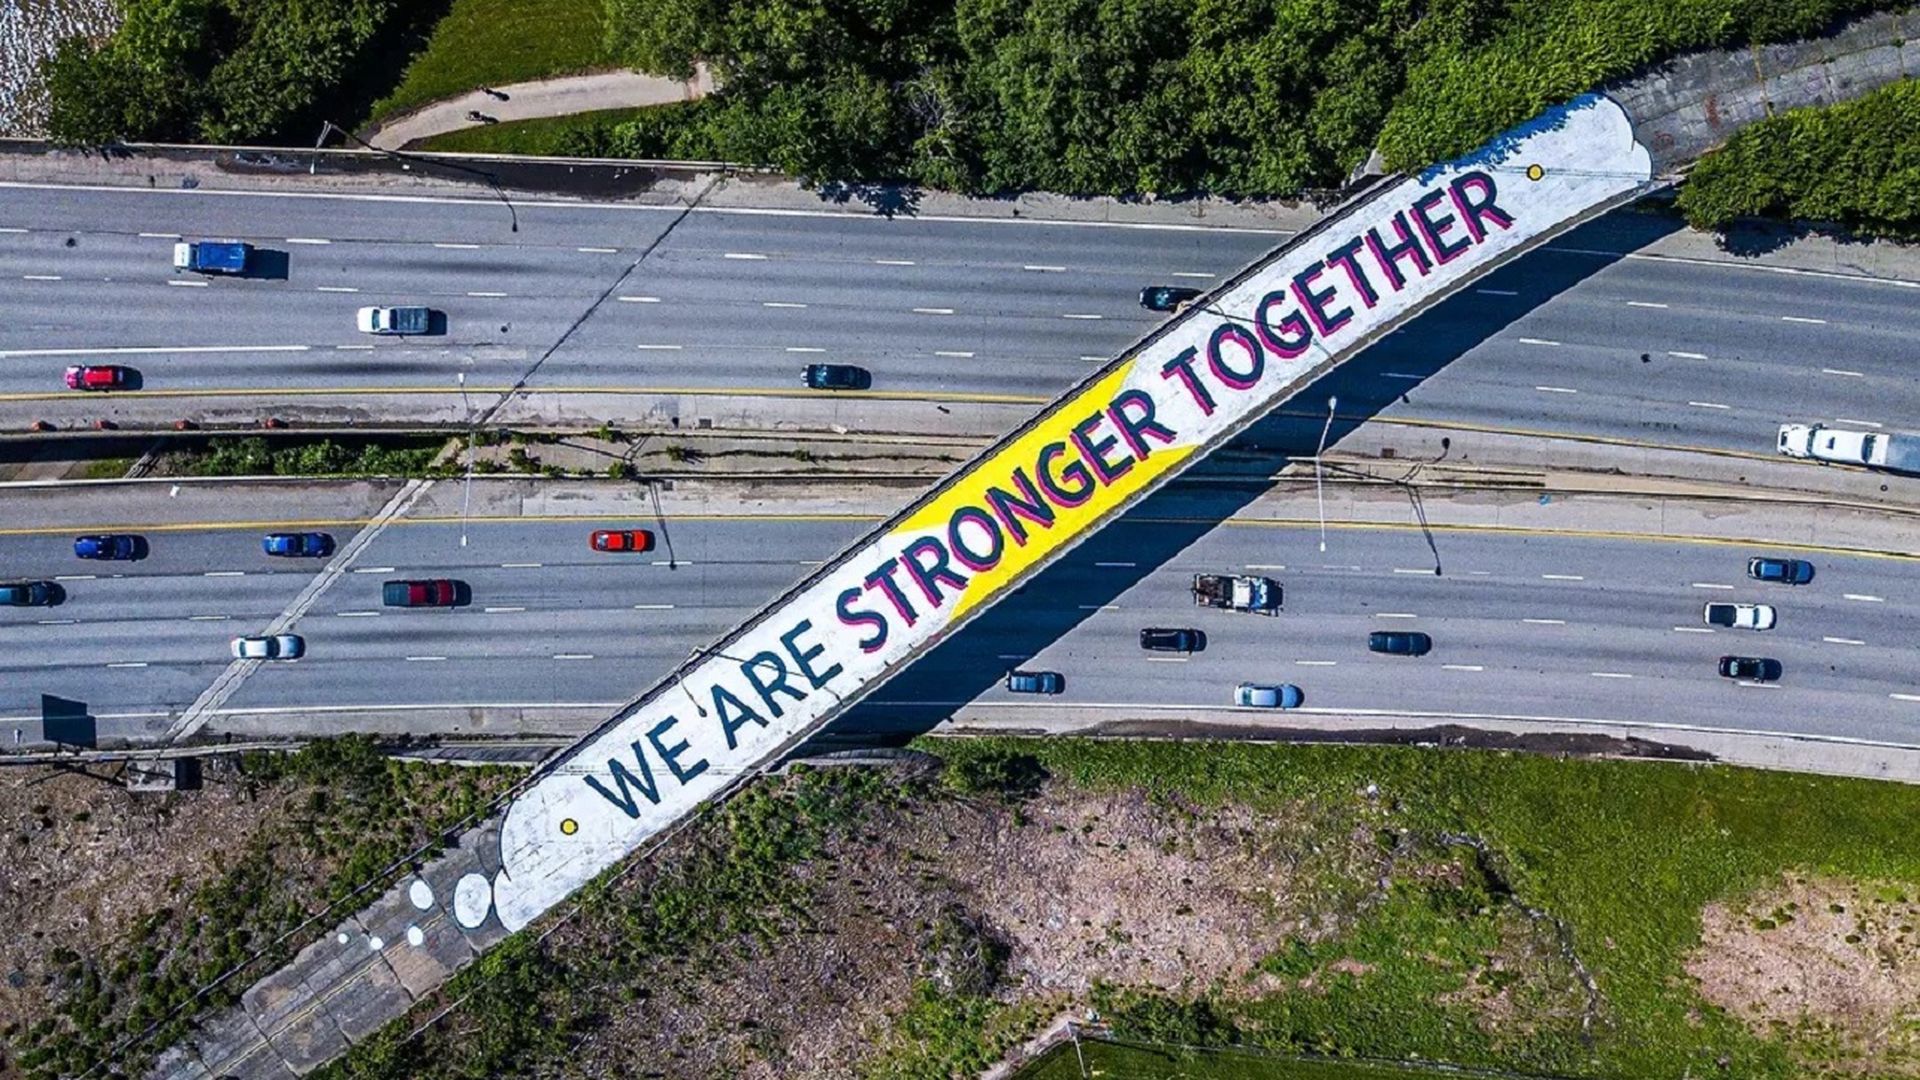 An overhead view of an abandoned highway overpass with a painted message on it reading "WE ARE STRONGER TOGETHER."